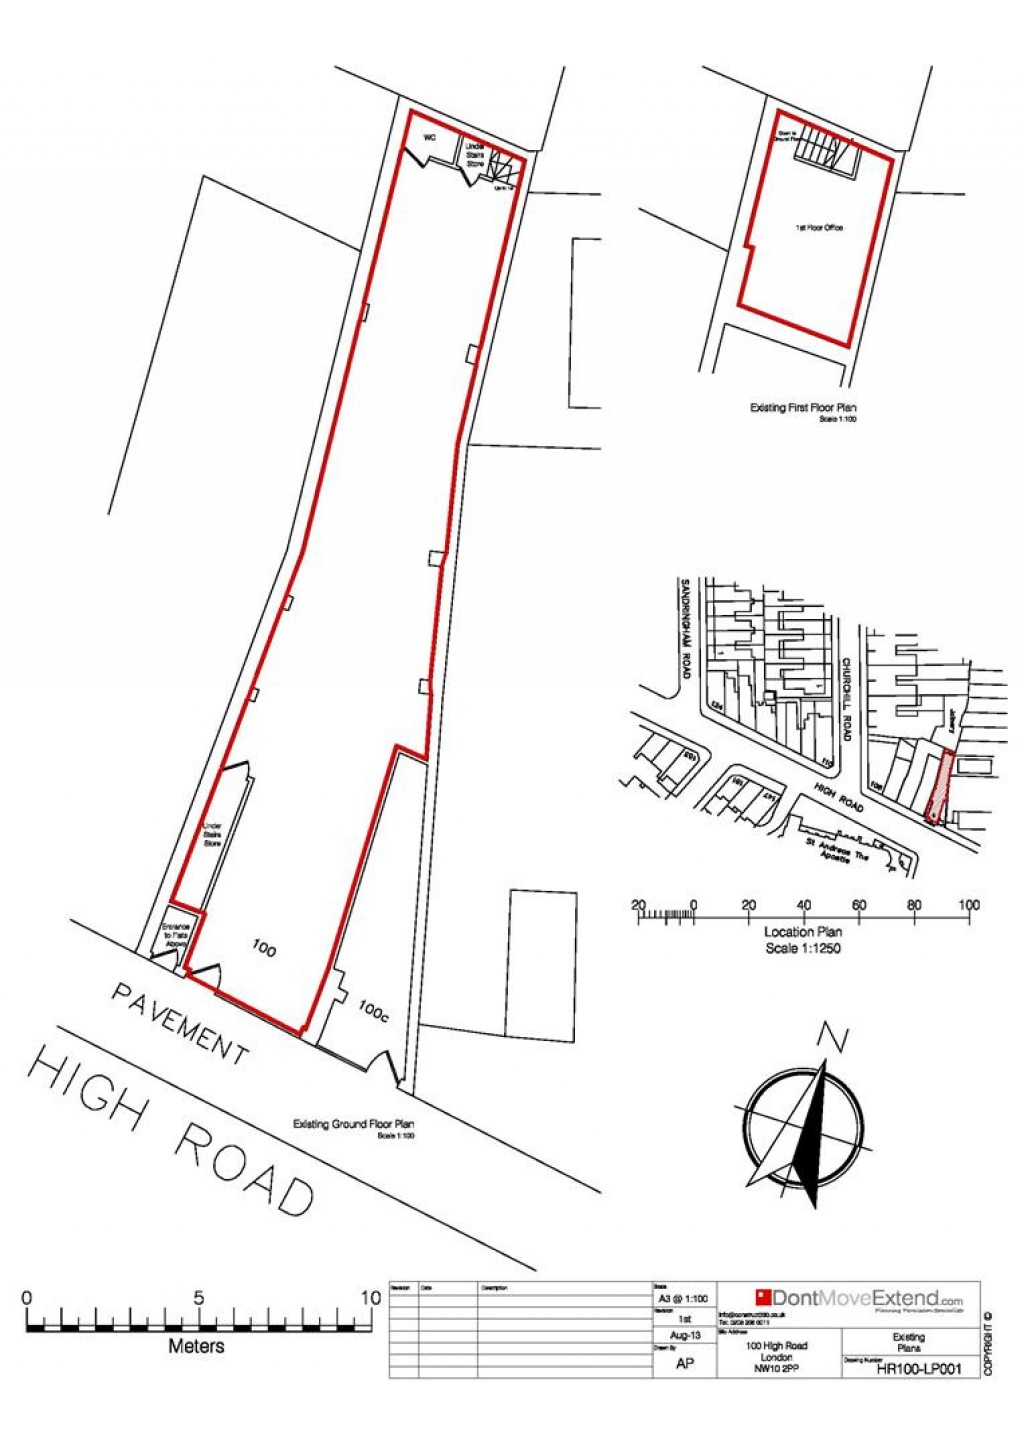 Floorplans For High Road, Willesdon, NW10